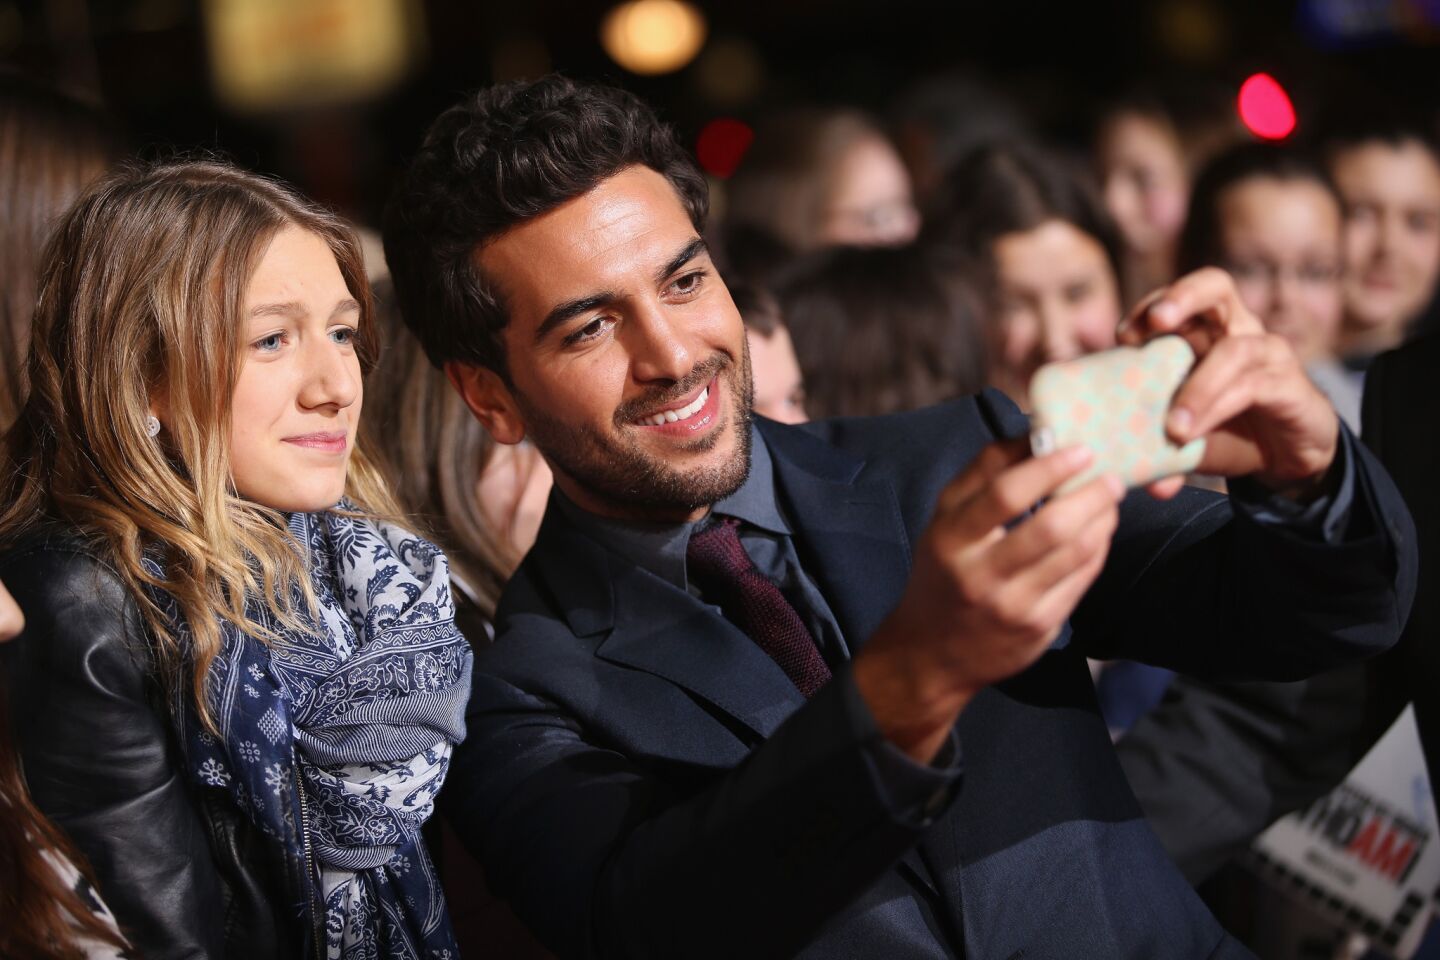 Elyas M'Barek attends the premiere of the film "Who Am I" at Zoo Palast on Sept. 23, 2014, in Berlin.